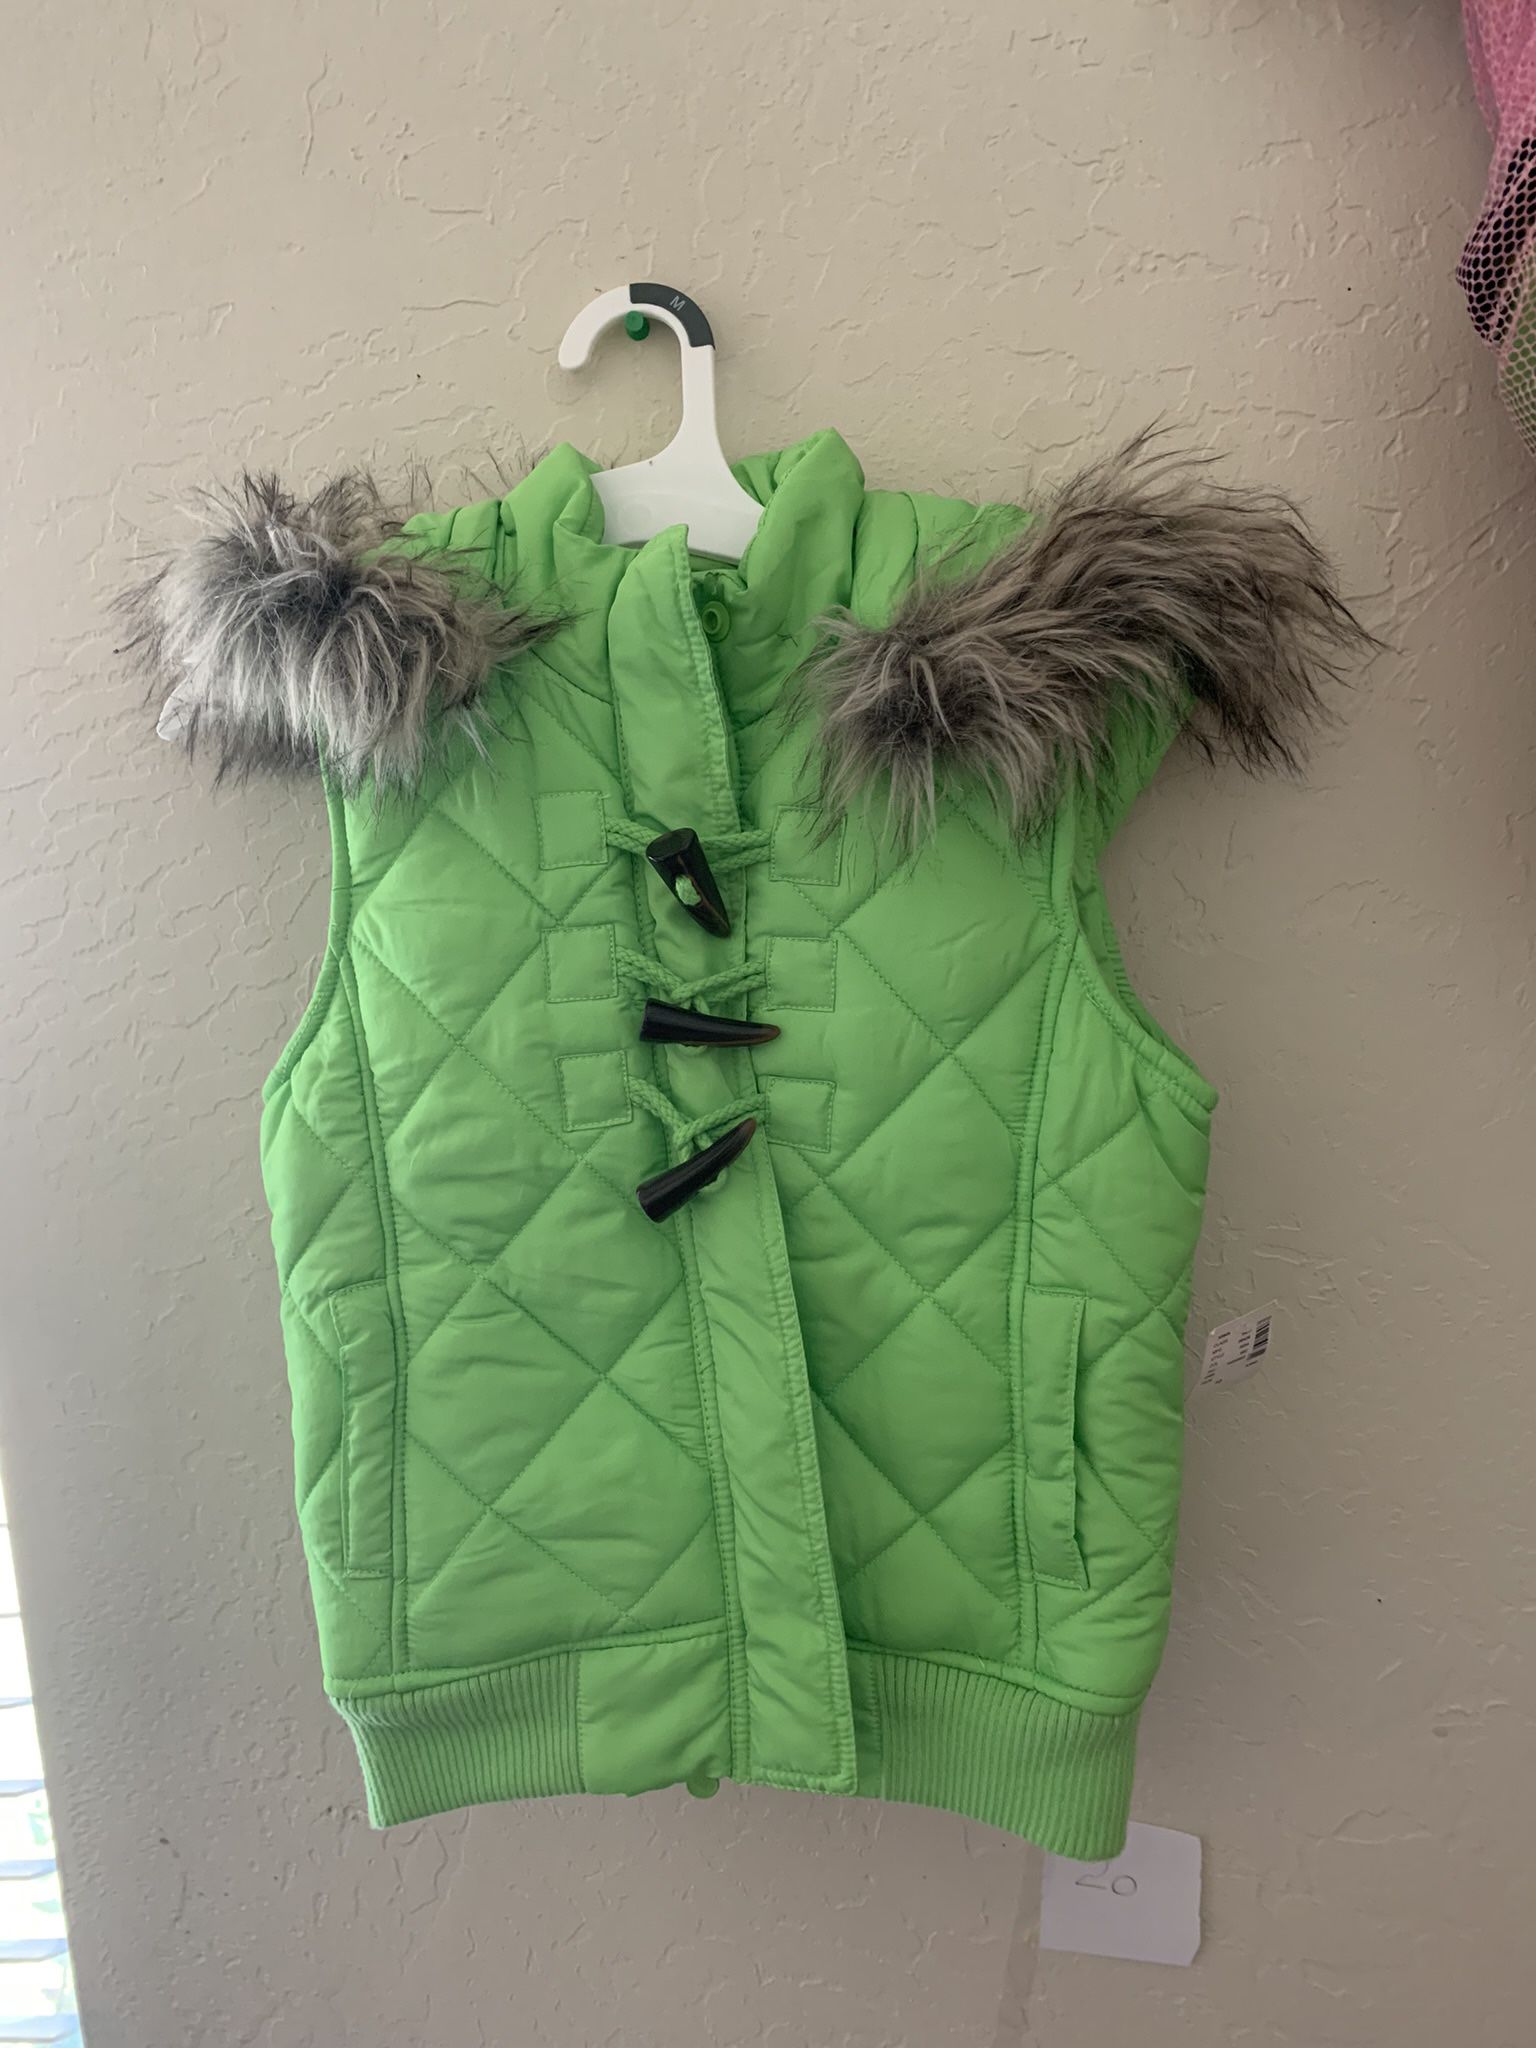 Justice Puffer Vest, Lime Green Furry Hood Size Girls 10